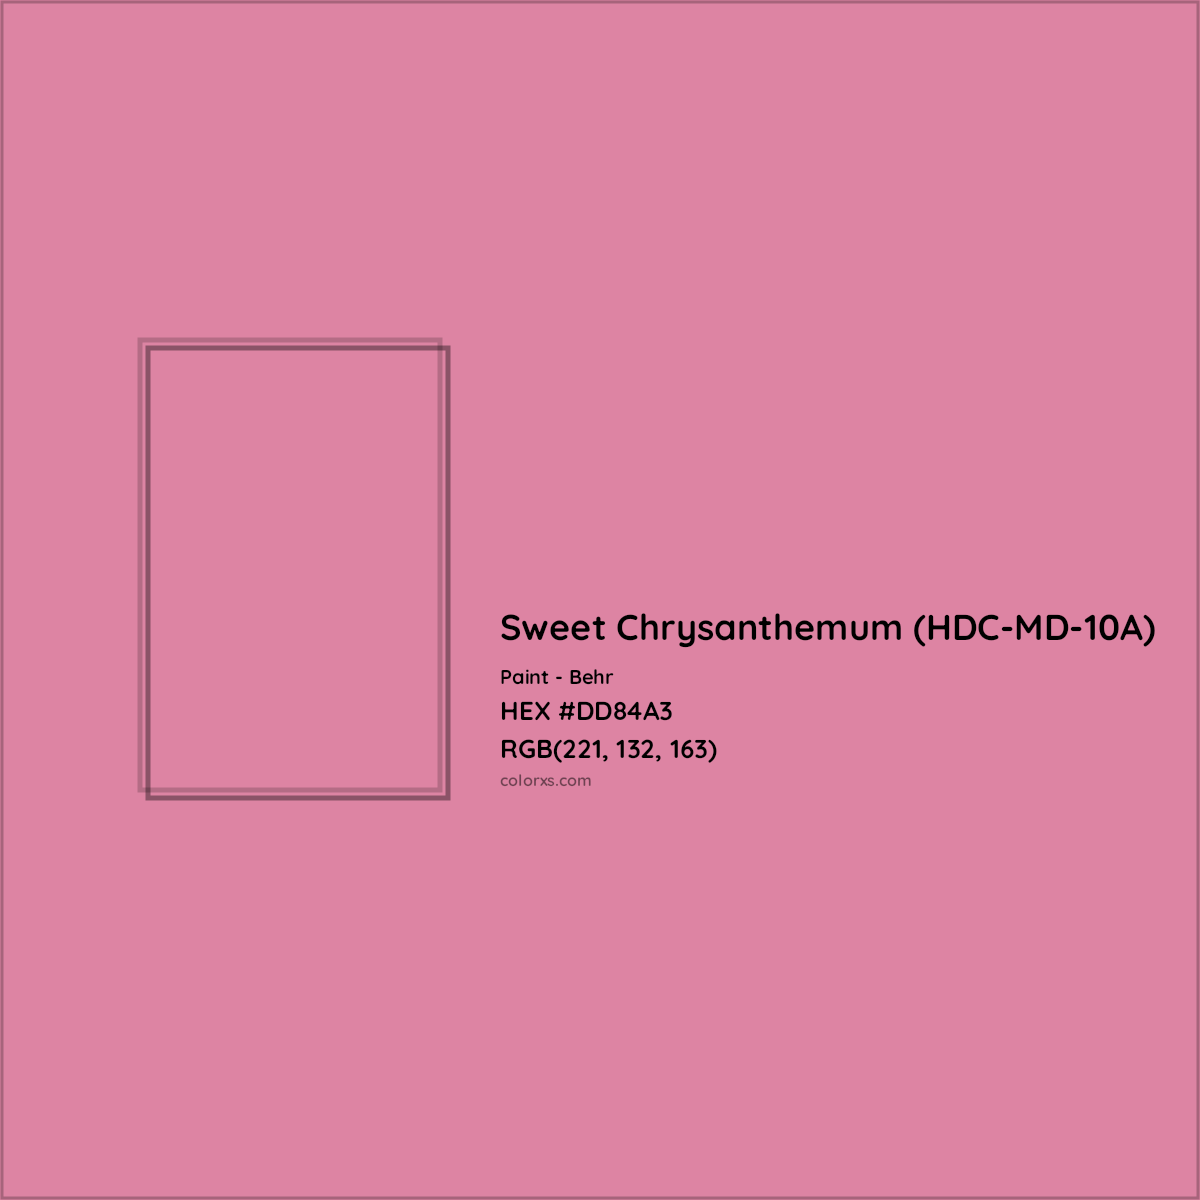 HEX #DD84A3 Sweet Chrysanthemum (HDC-MD-10A) Paint Behr - Color Code